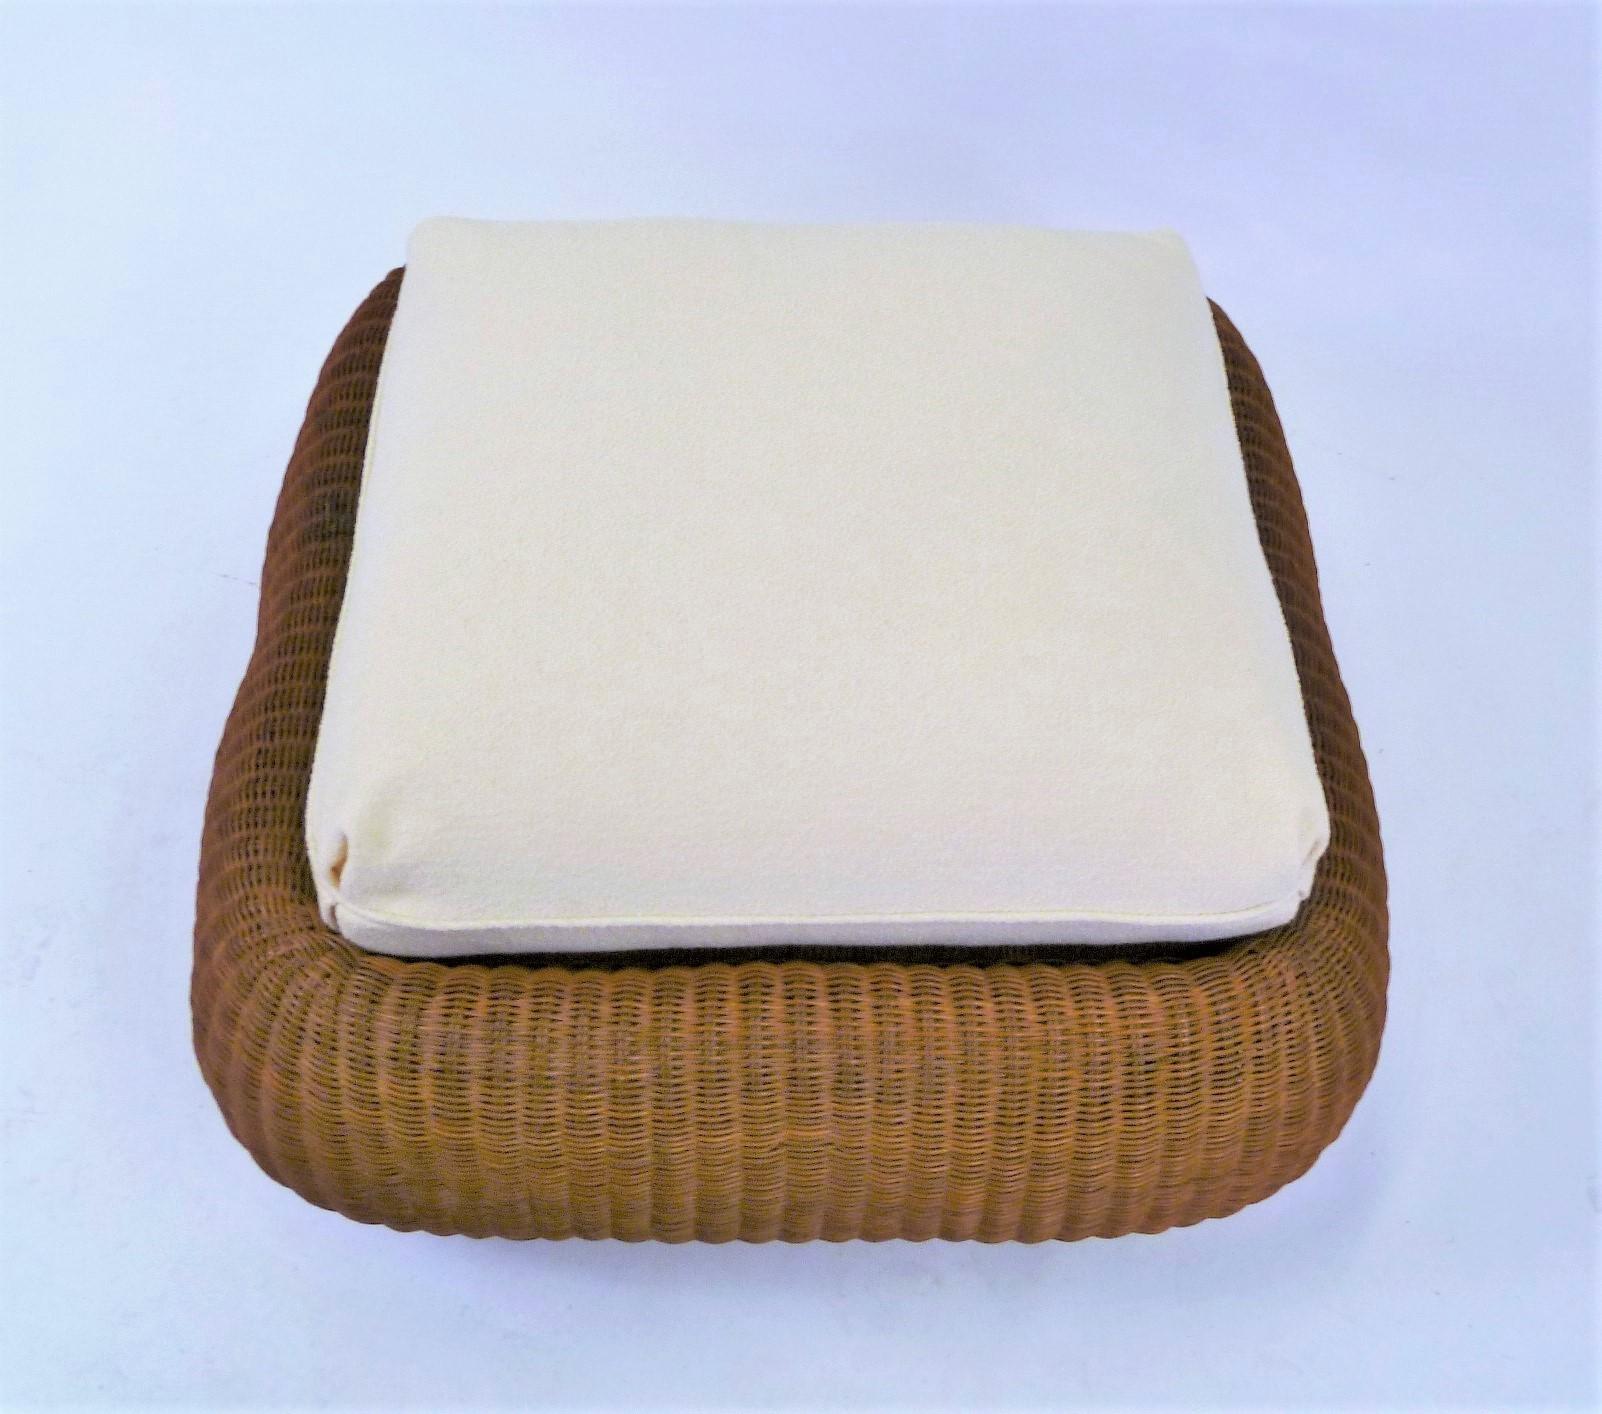 Handwoven rattan ottoman or pouf in the style of Eero Aarnio and his Jutta Jakkara stools. Wonderful rounded form. Cushion with new light cream bouclé upholstery. Great extra seating.
Purchased 1979 from Bloomingdales, NYC.
Measurements: Rattan 30